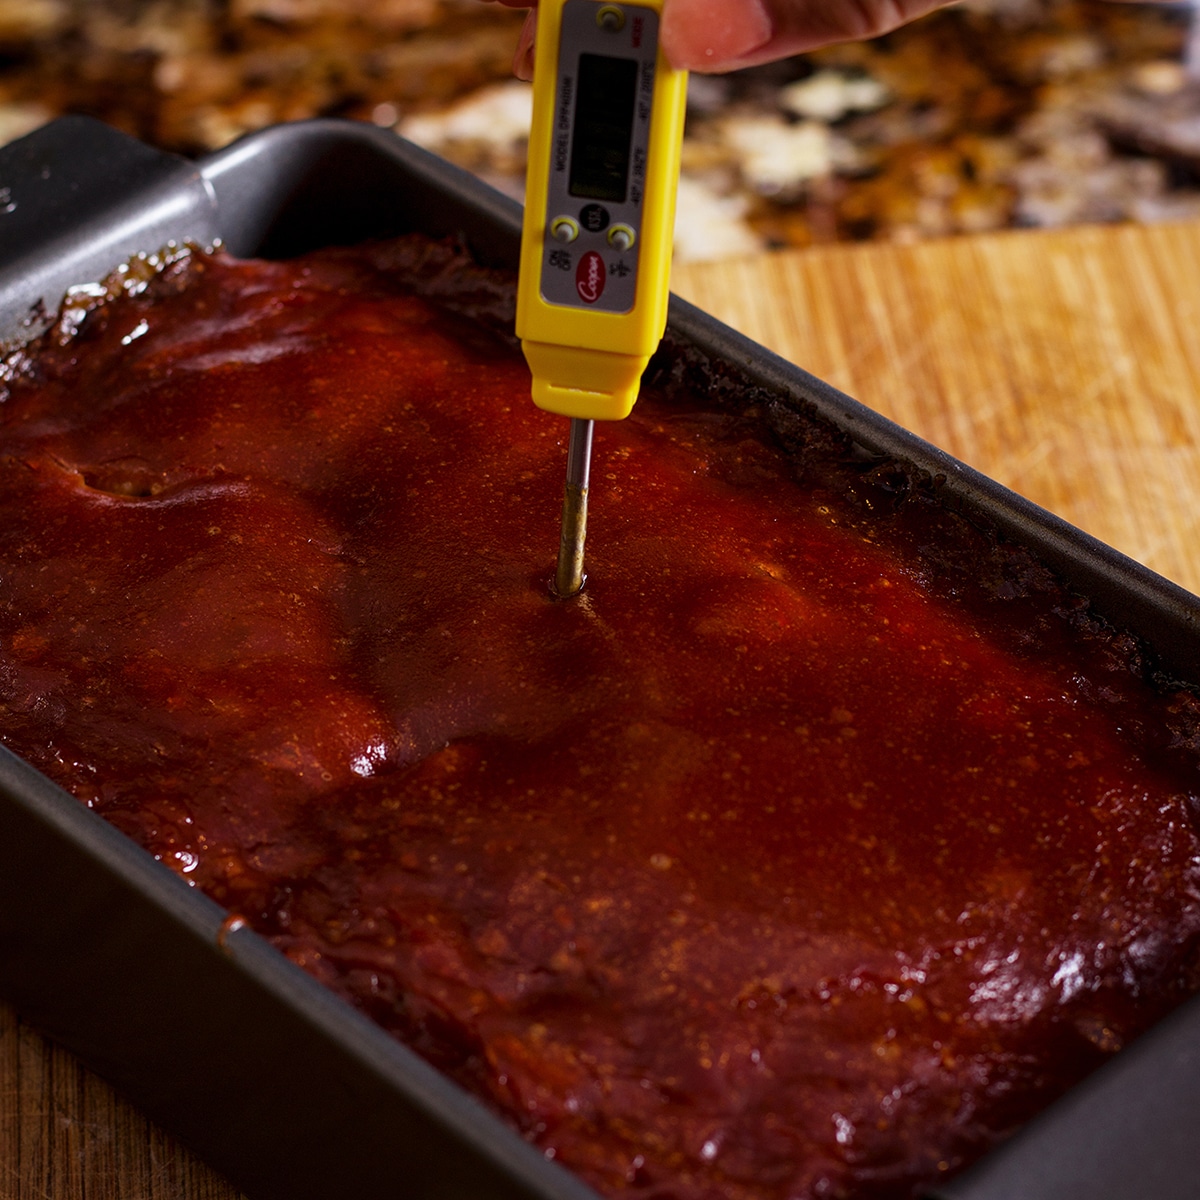 Sticking a meat thermometer in the center of a meatloaf to check its internal temperature.